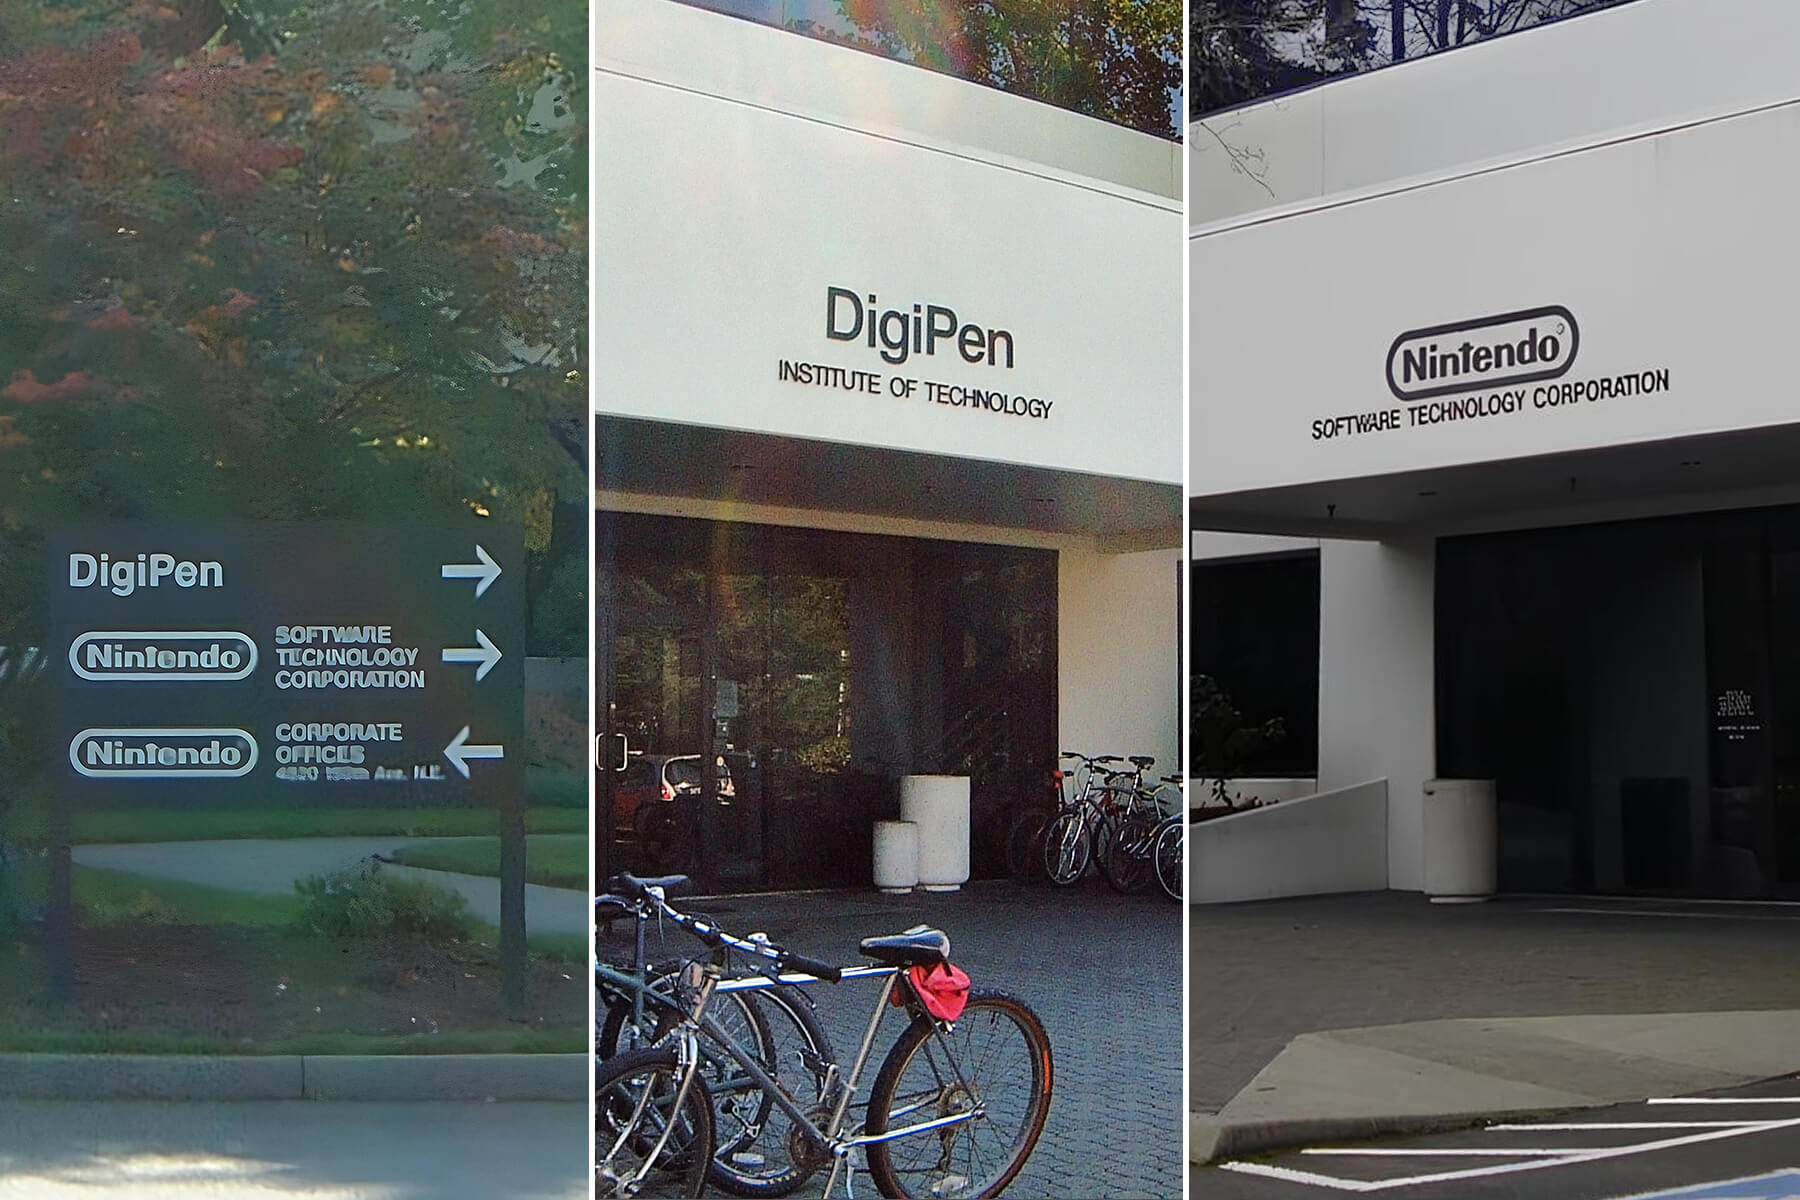 A picture of a sign giving directions to Nintendo Software Technology and DigiPen, next to exterior shots of both.